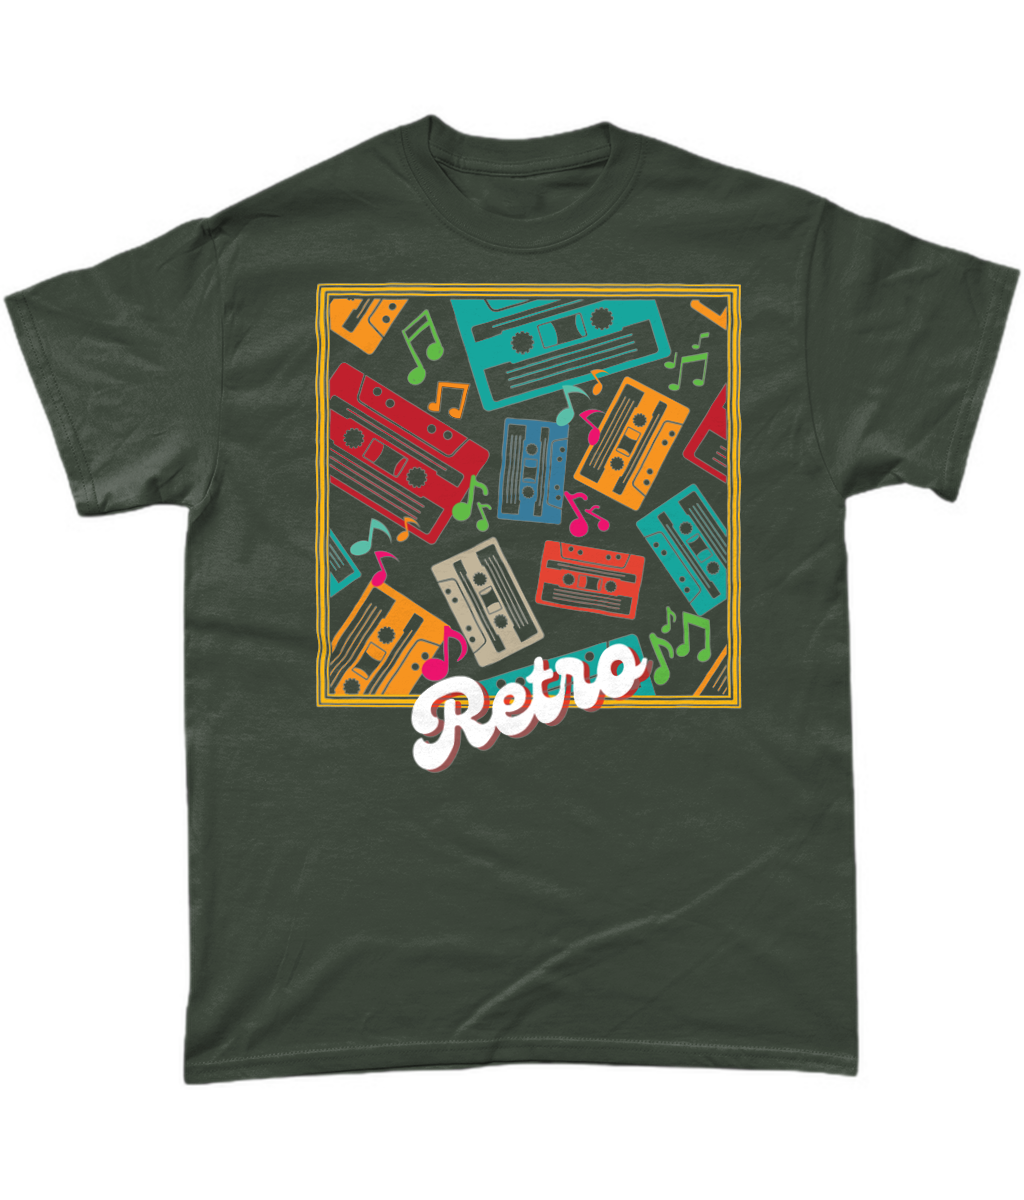 Military Green T-Shirt goldish square frame with colourful music notes and cassette tapes spread out at different angles in different colours ,words retro in a retro style at bottom 